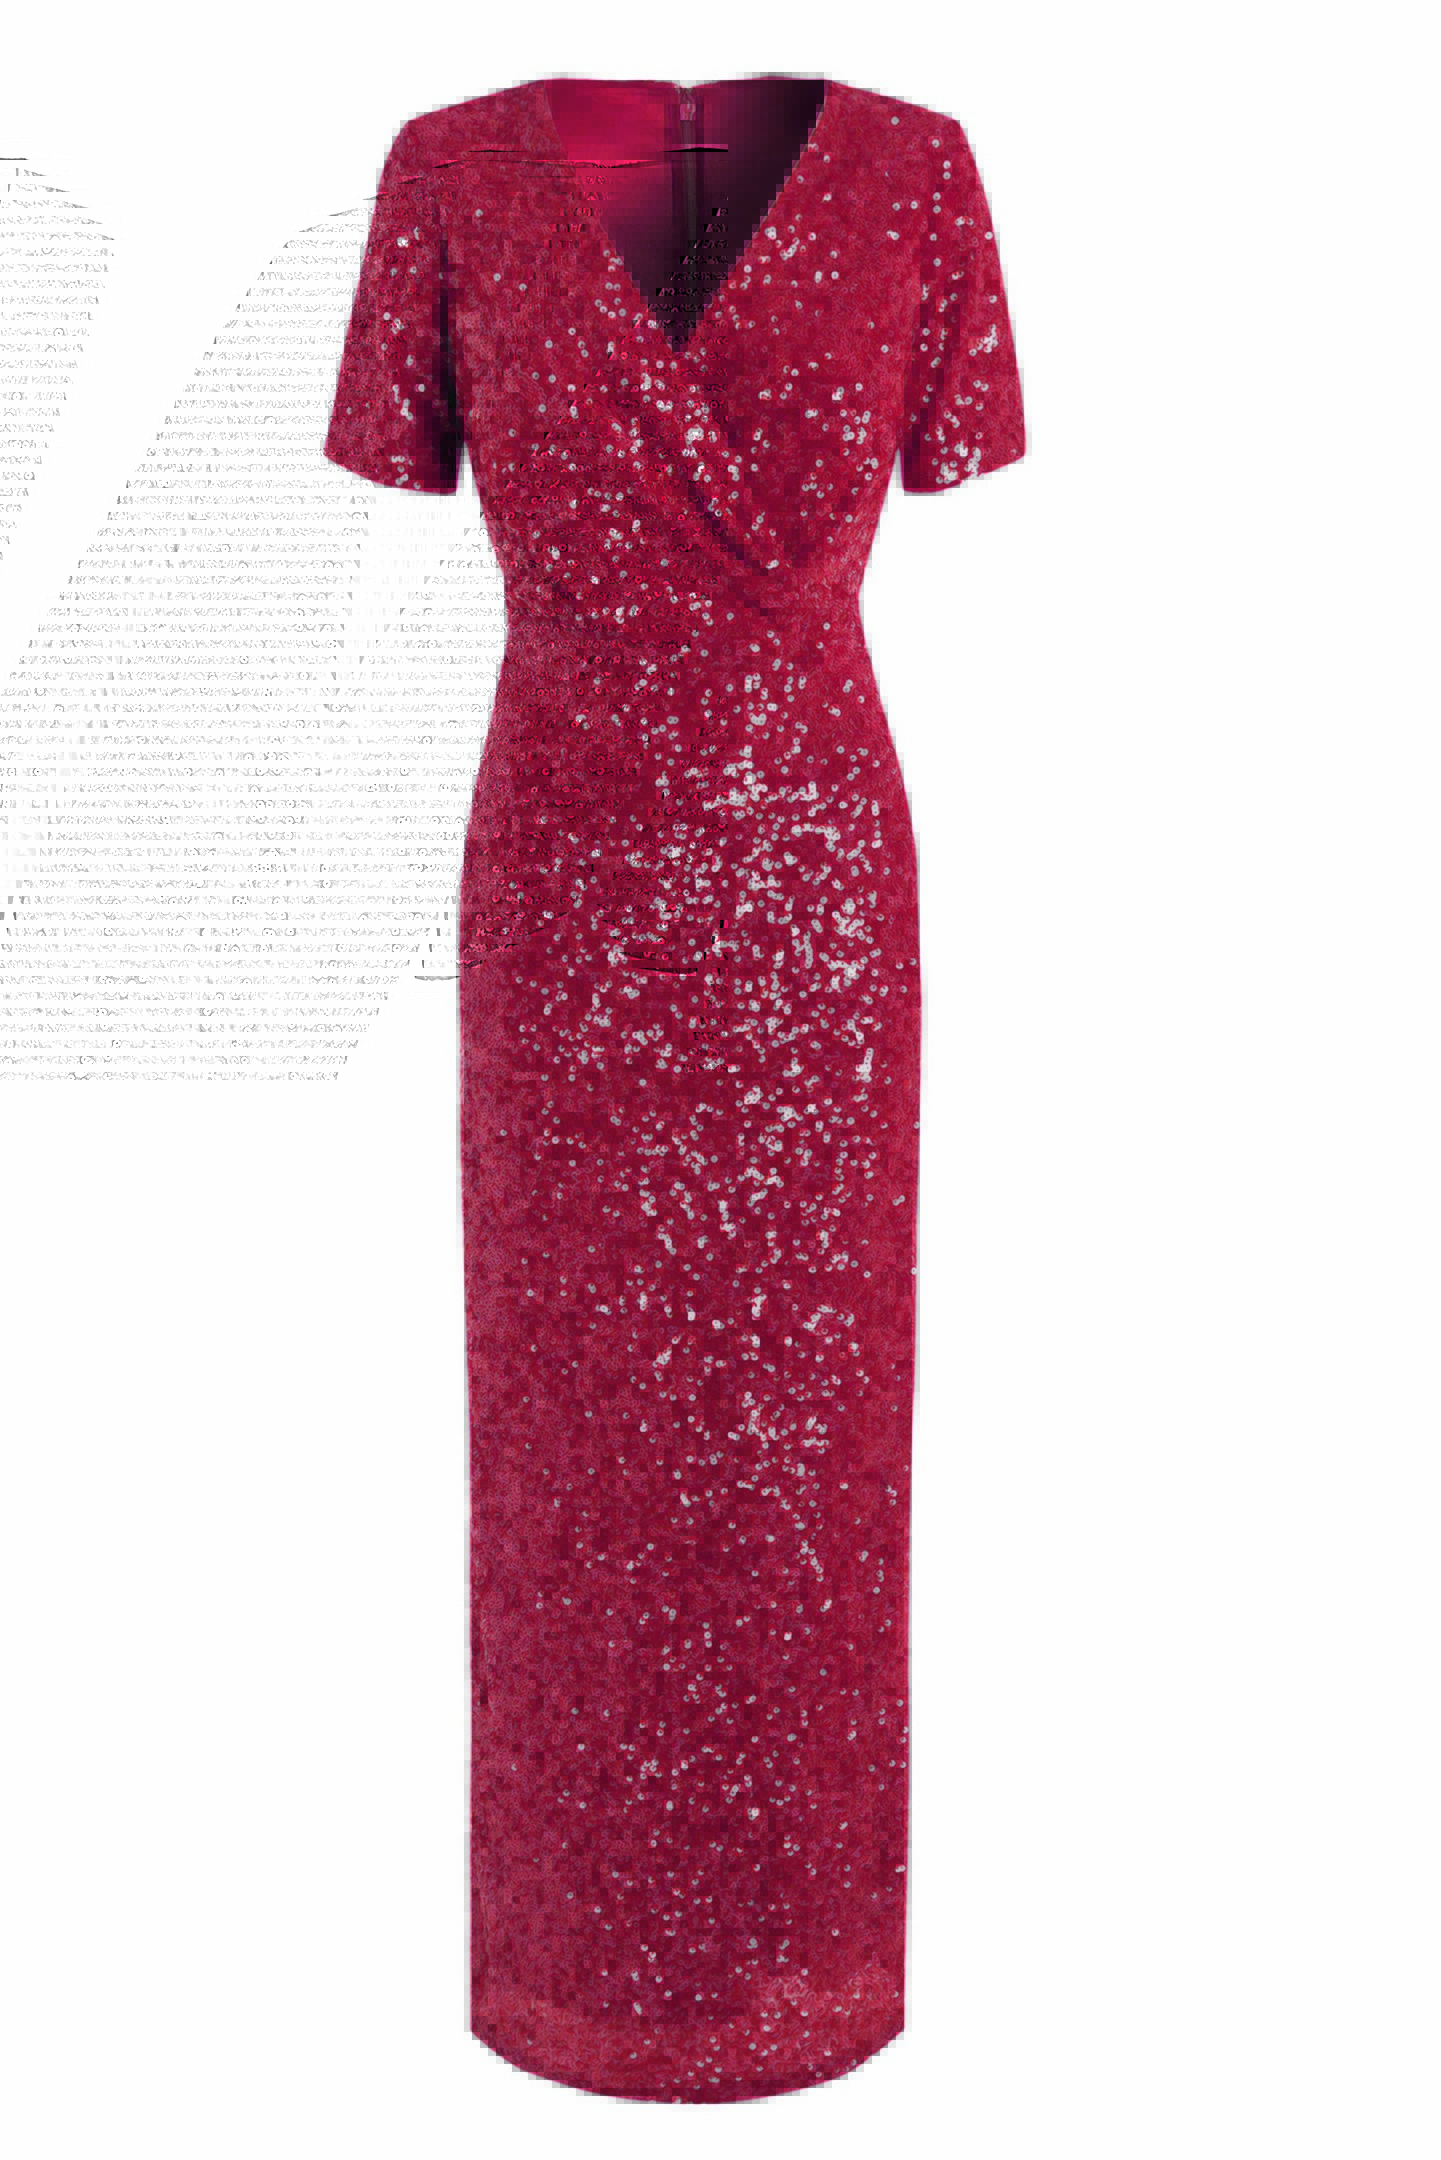 Jenny Packham Designer Dark Red Sequin Embellished Maxi Dress, currently reduced to £157.50 from £225 